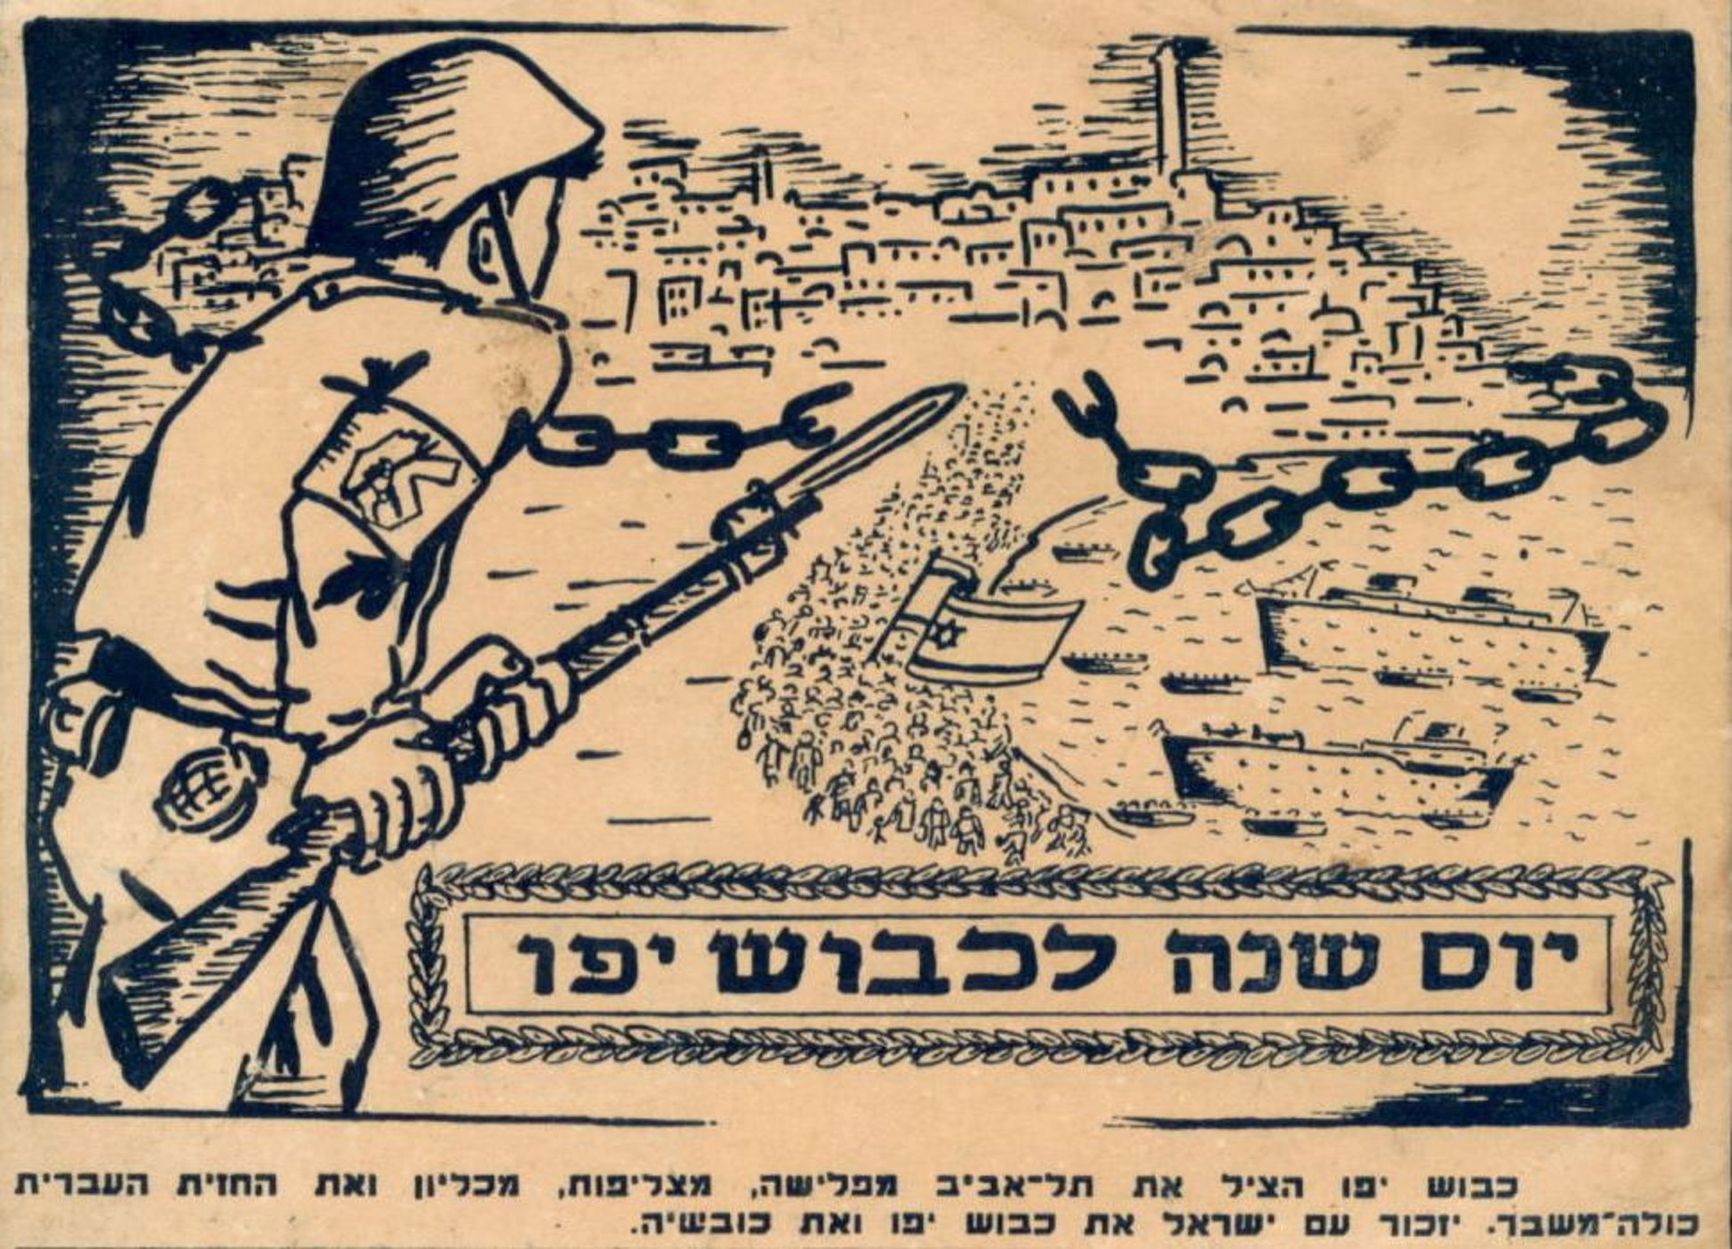 Irgun poster calling for settlers to break through to Palestine